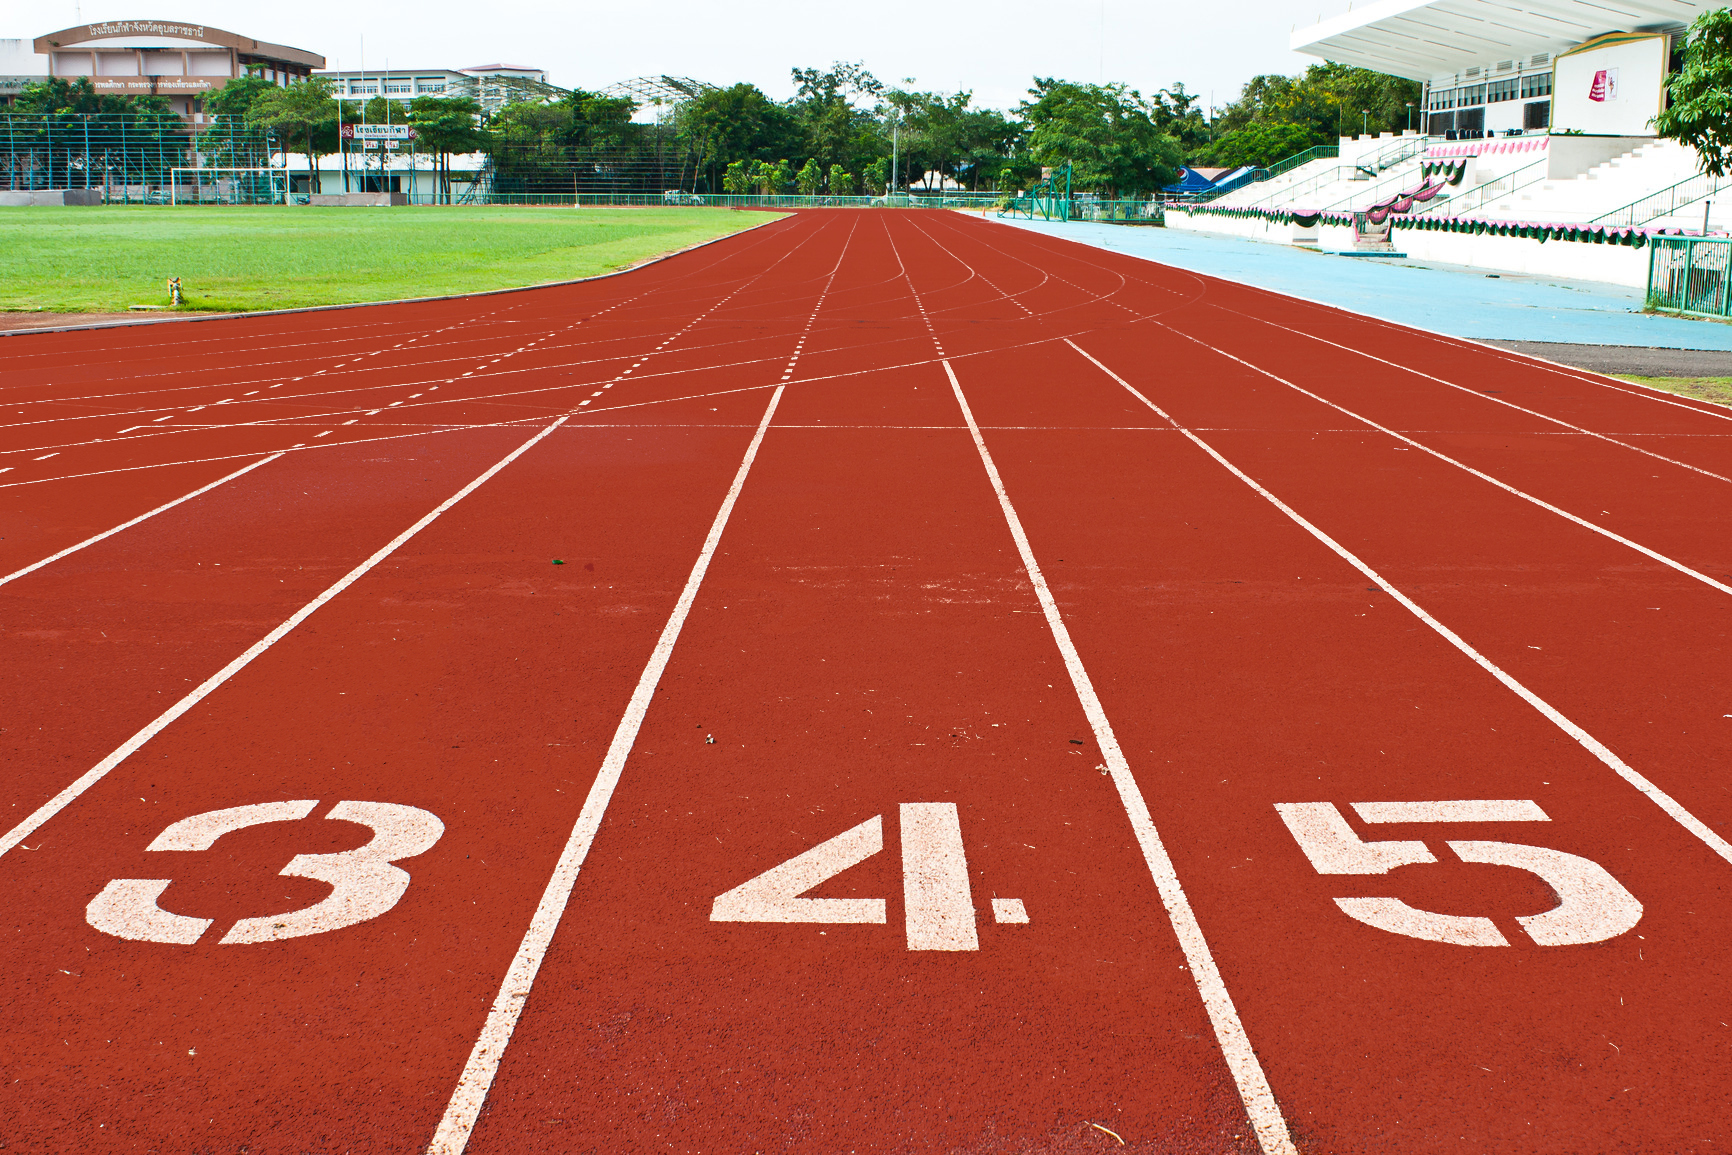 track and field wallpaper,track and field athletics,race track,athletics,sport venue,sports